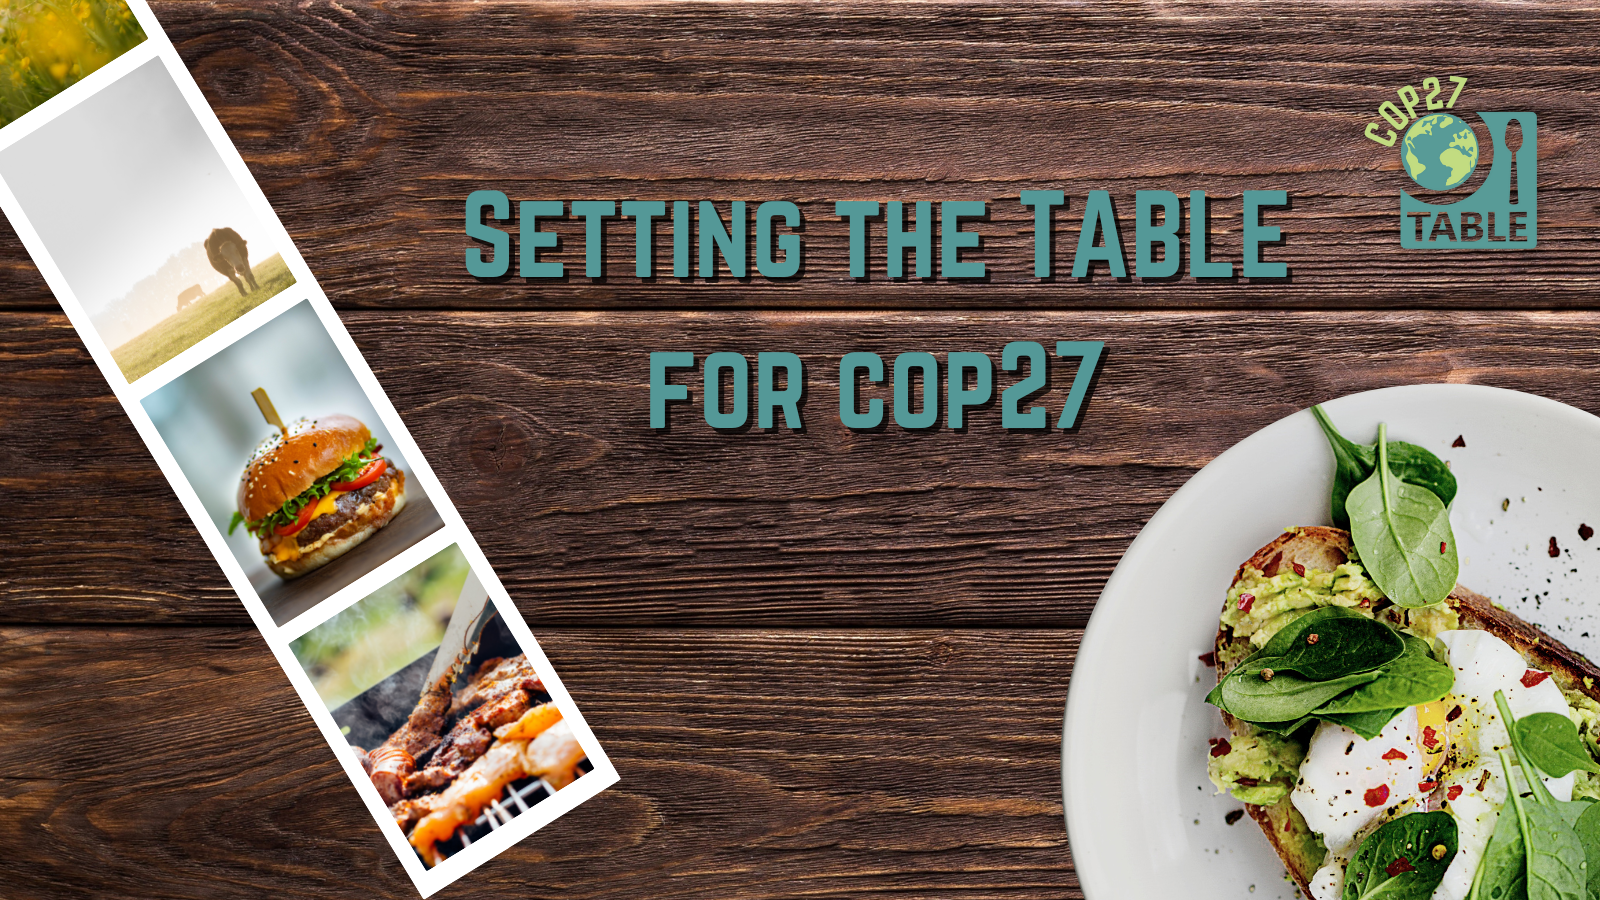 A flyer for "Setting the TABLE for COP27" resource list